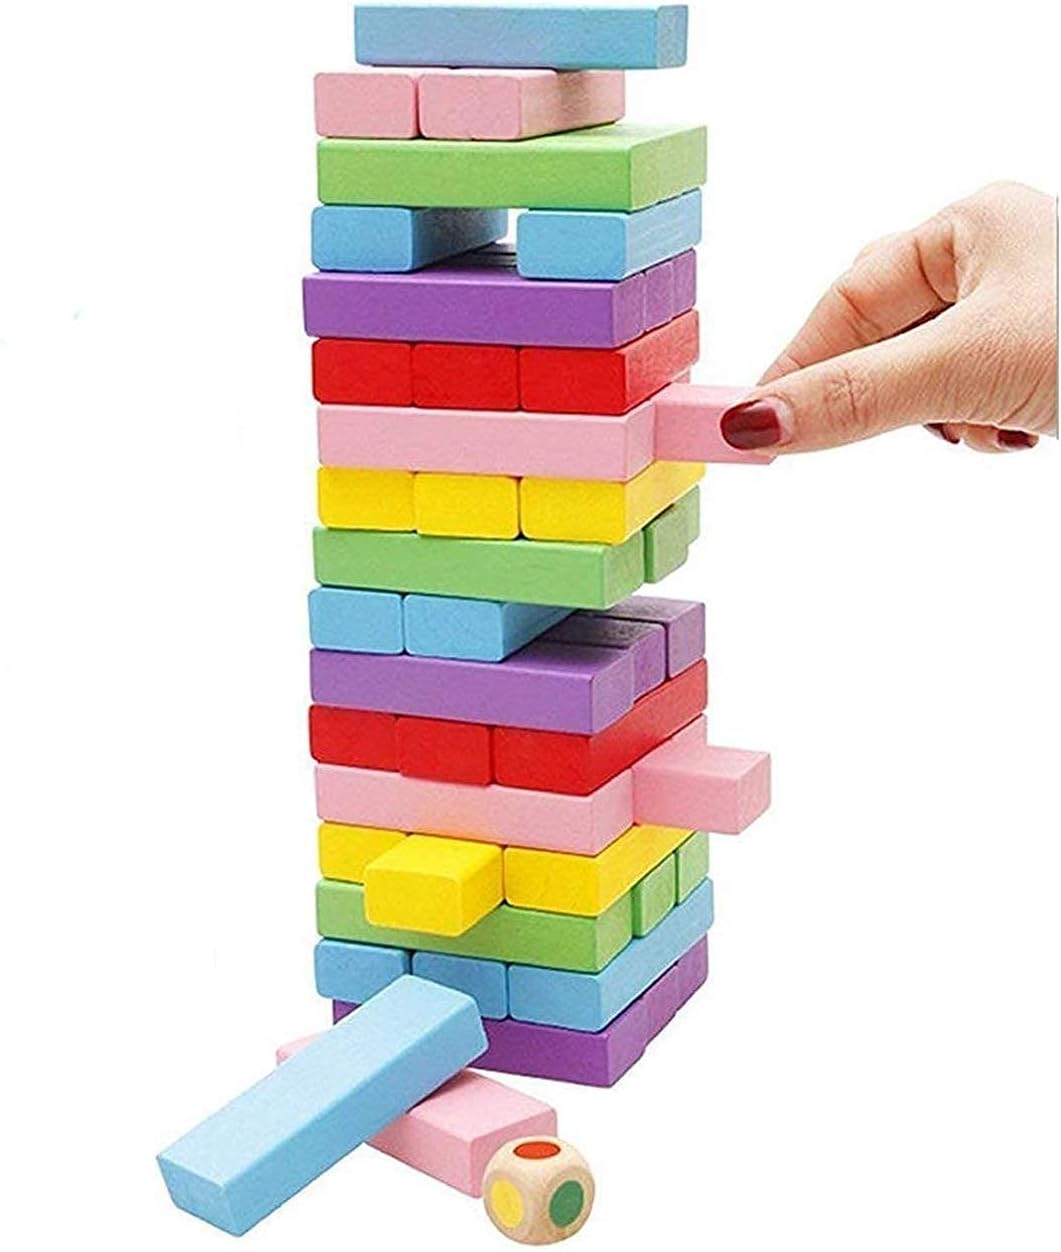 VIO 54 Pcs Wooden Blocks Games for Adults and Kids, Wood Tumbling Tower Stacking Toys with Dices Board Best Educational Puzzle Game